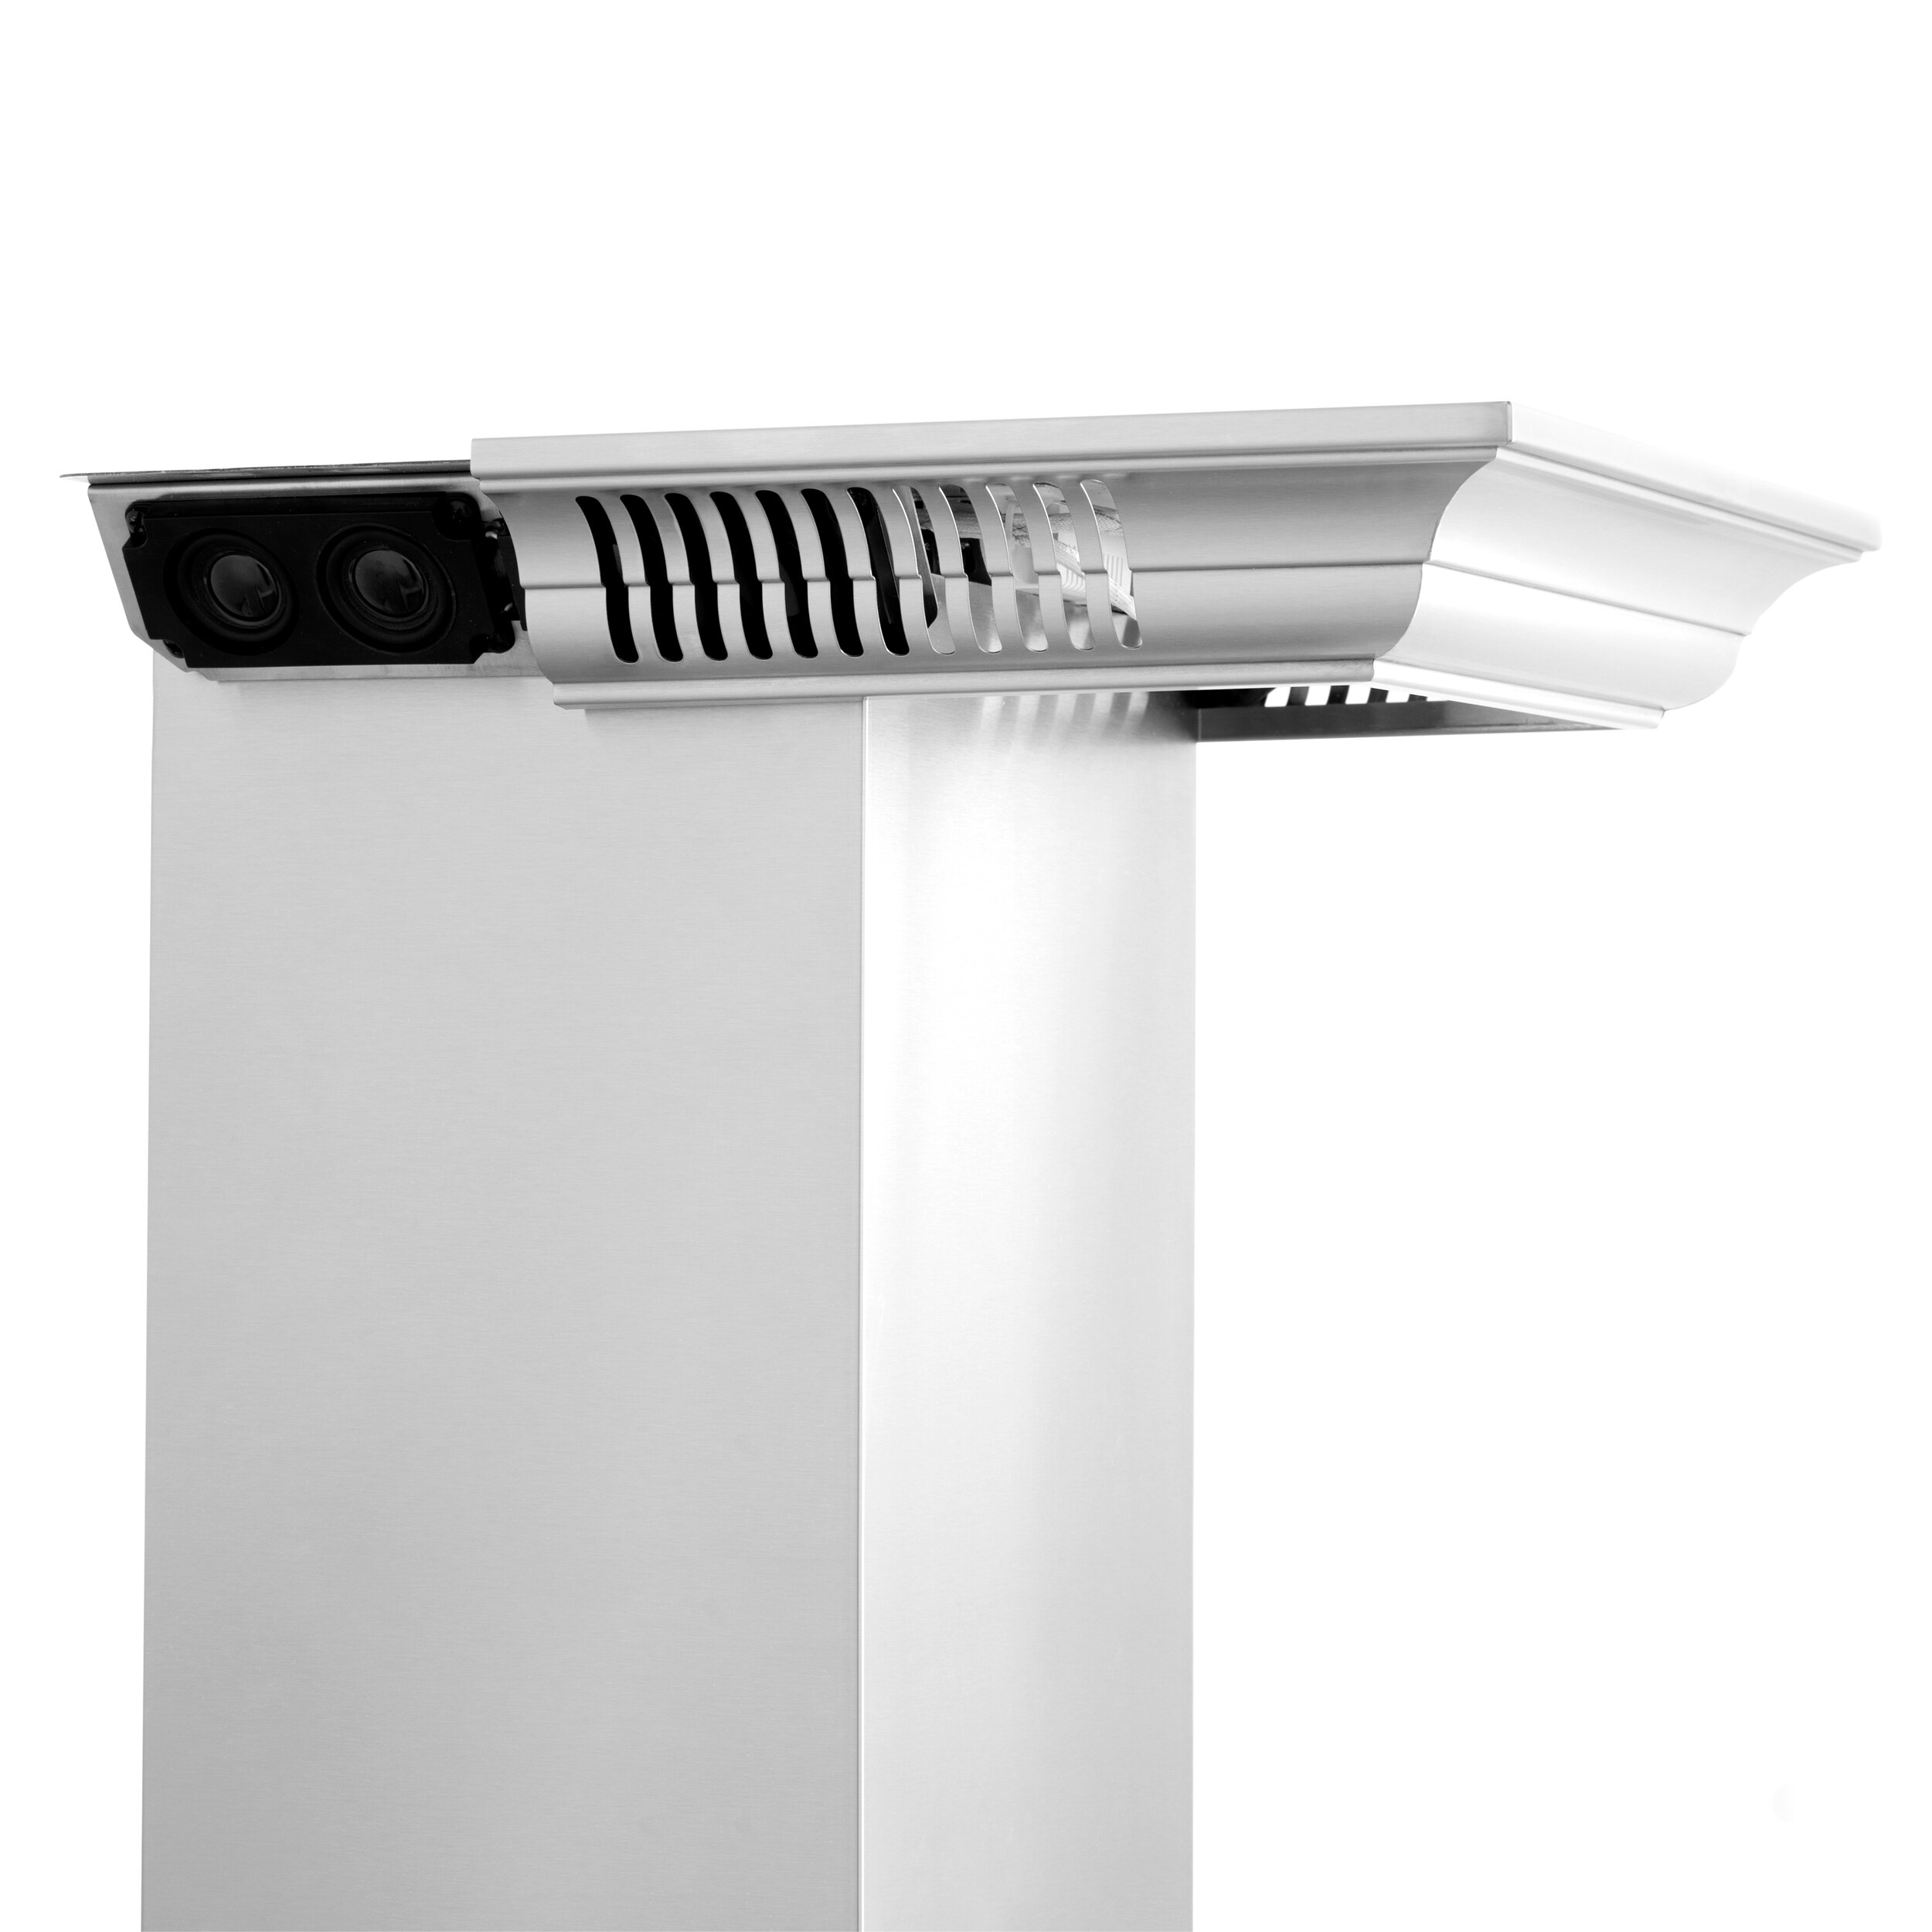 Professional 700 CFM Wall Mount Range Hood with CrownSound 